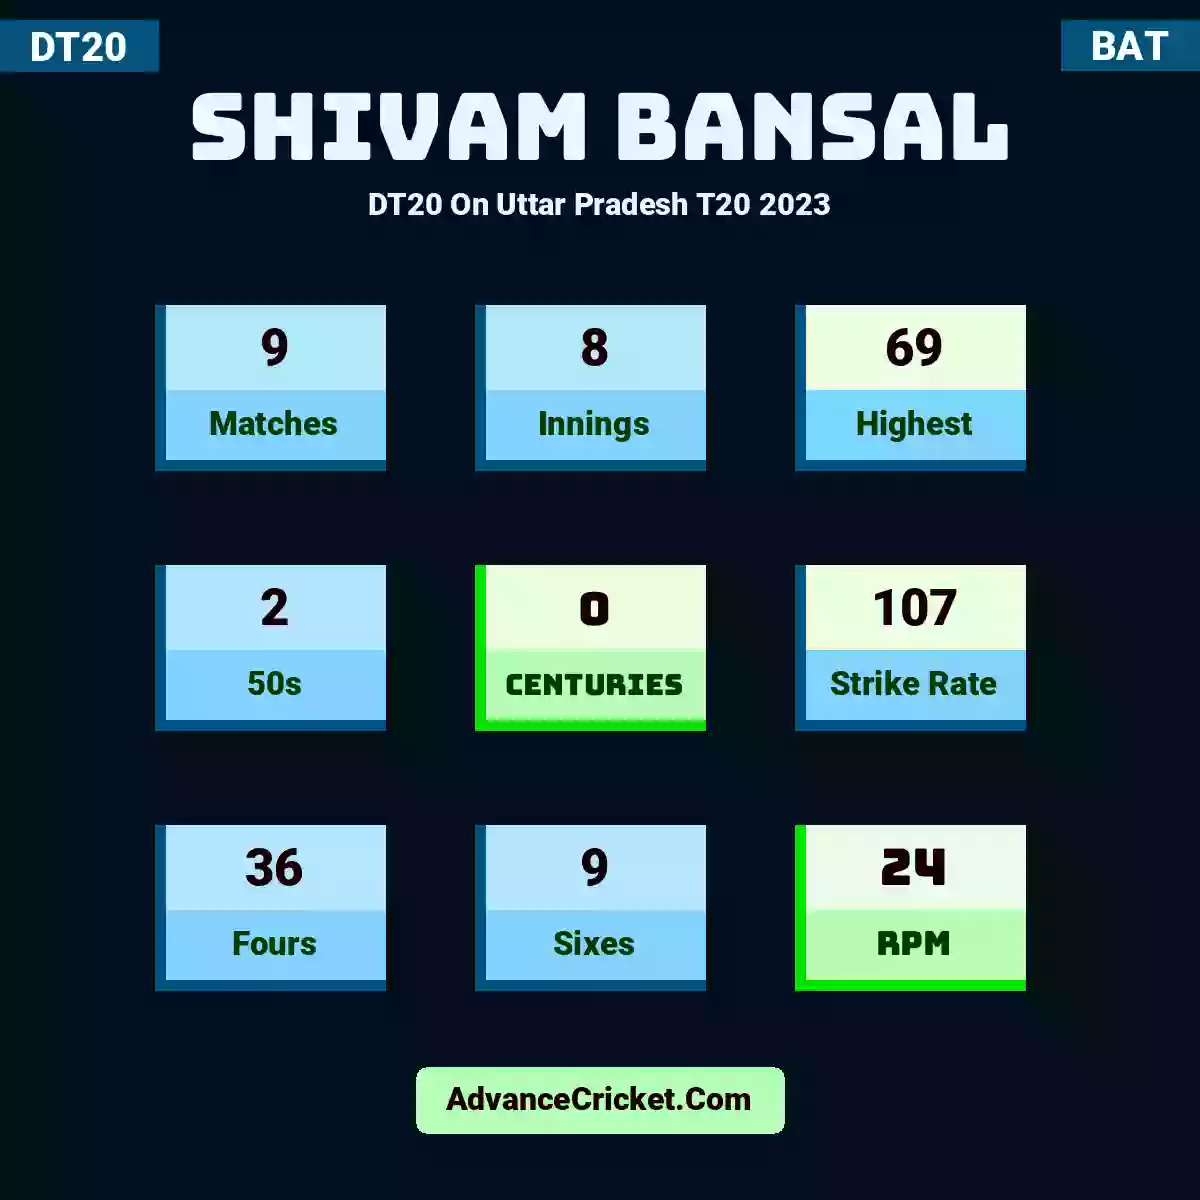 Shivam Bansal DT20  On Uttar Pradesh T20 2023, Shivam Bansal played 9 matches, scored 69 runs as highest, 2 half-centuries, and 0 centuries, with a strike rate of 107. S.Bansal hit 36 fours and 9 sixes, with an RPM of 24.